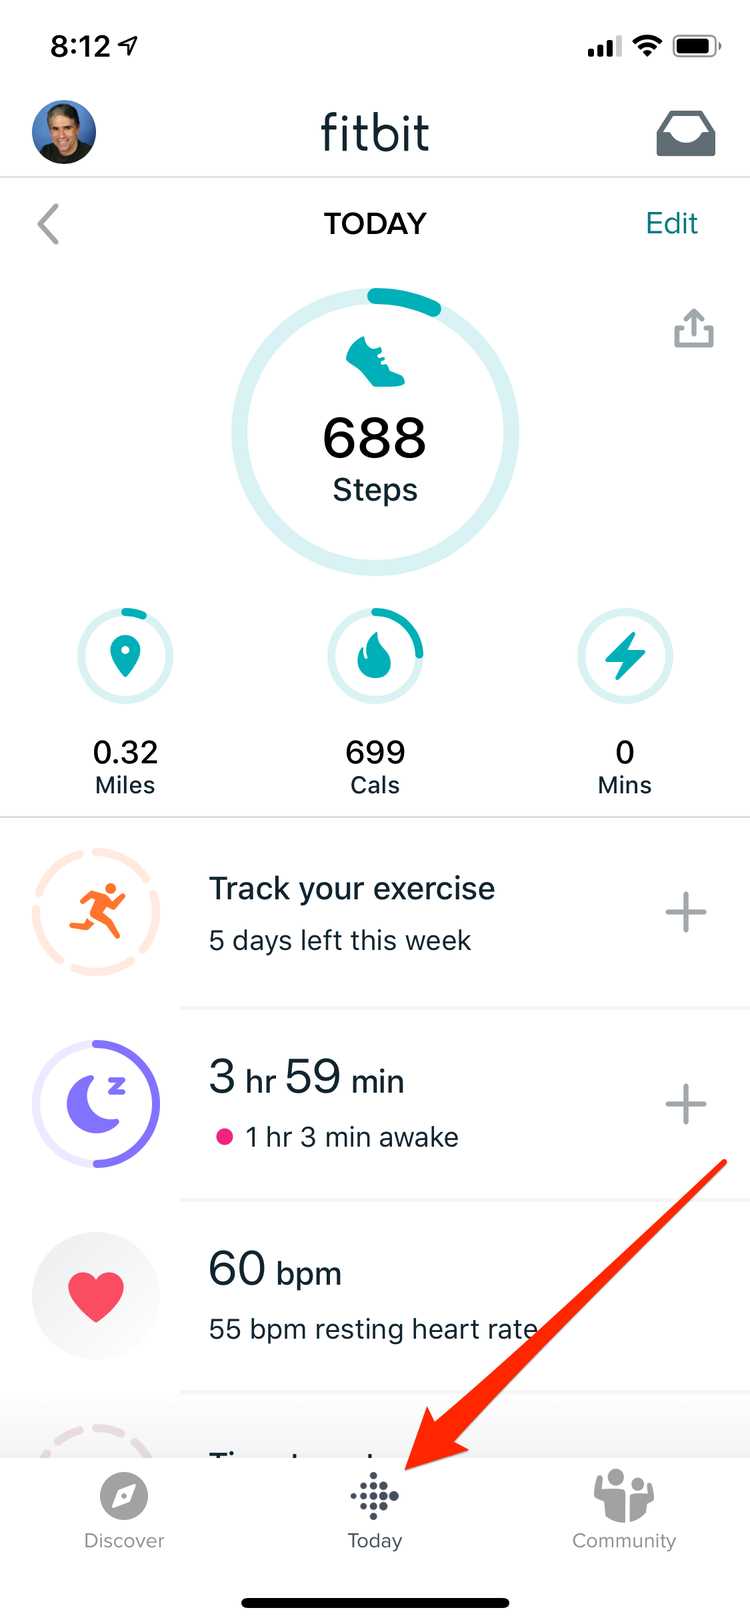 Verify the Time Zone Settings on Your Fitbit